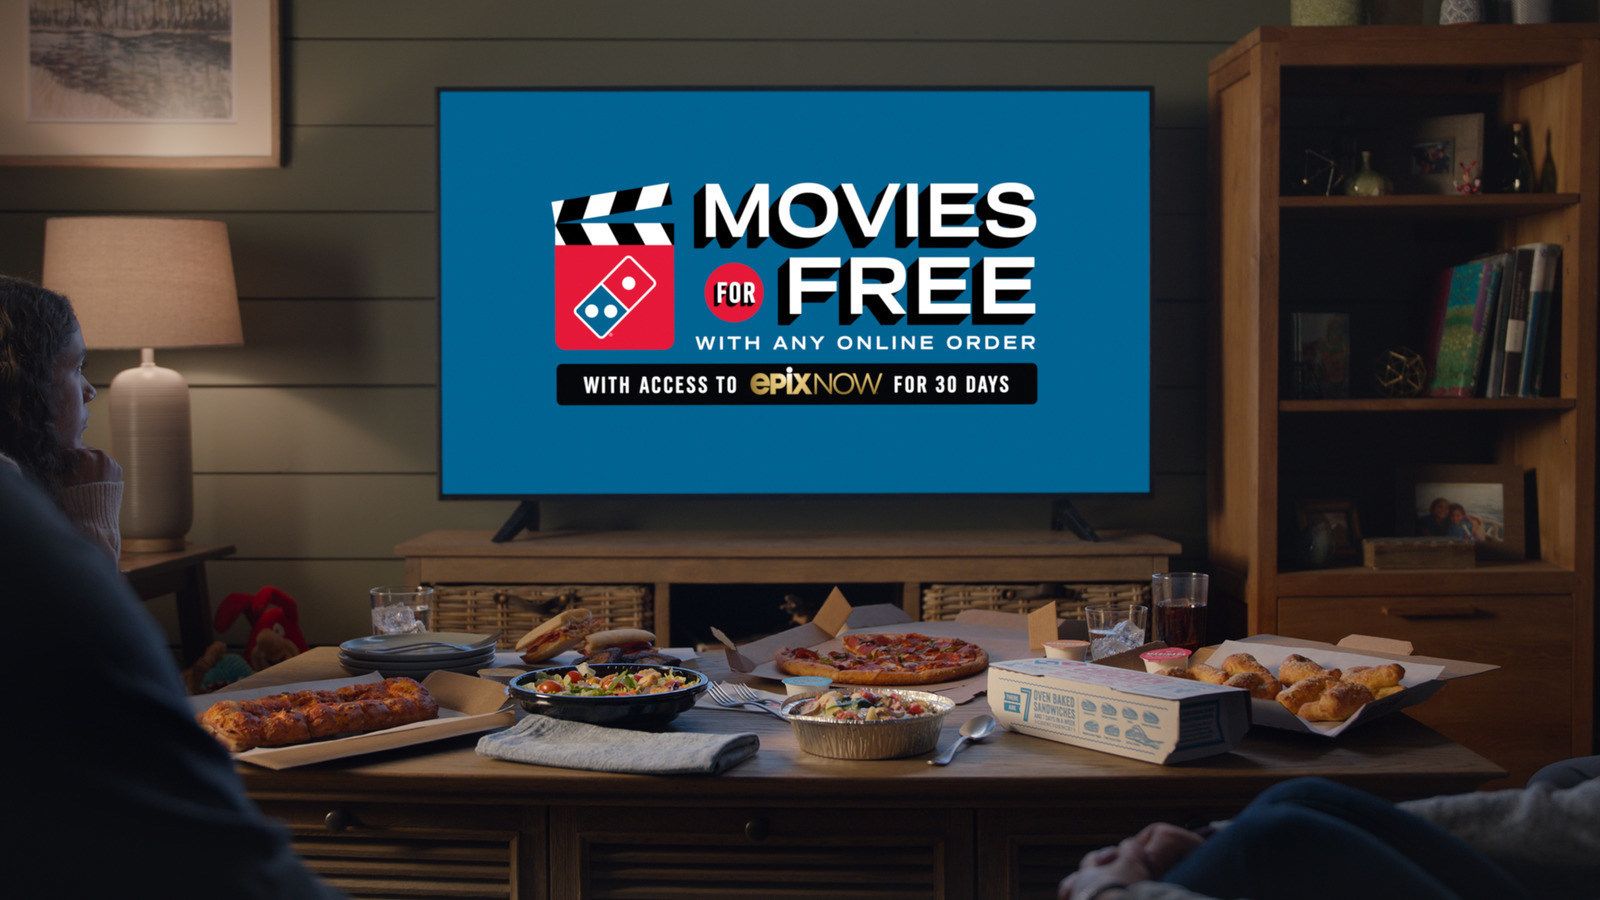 Domino's Pizza Night Just Became More Cinematic